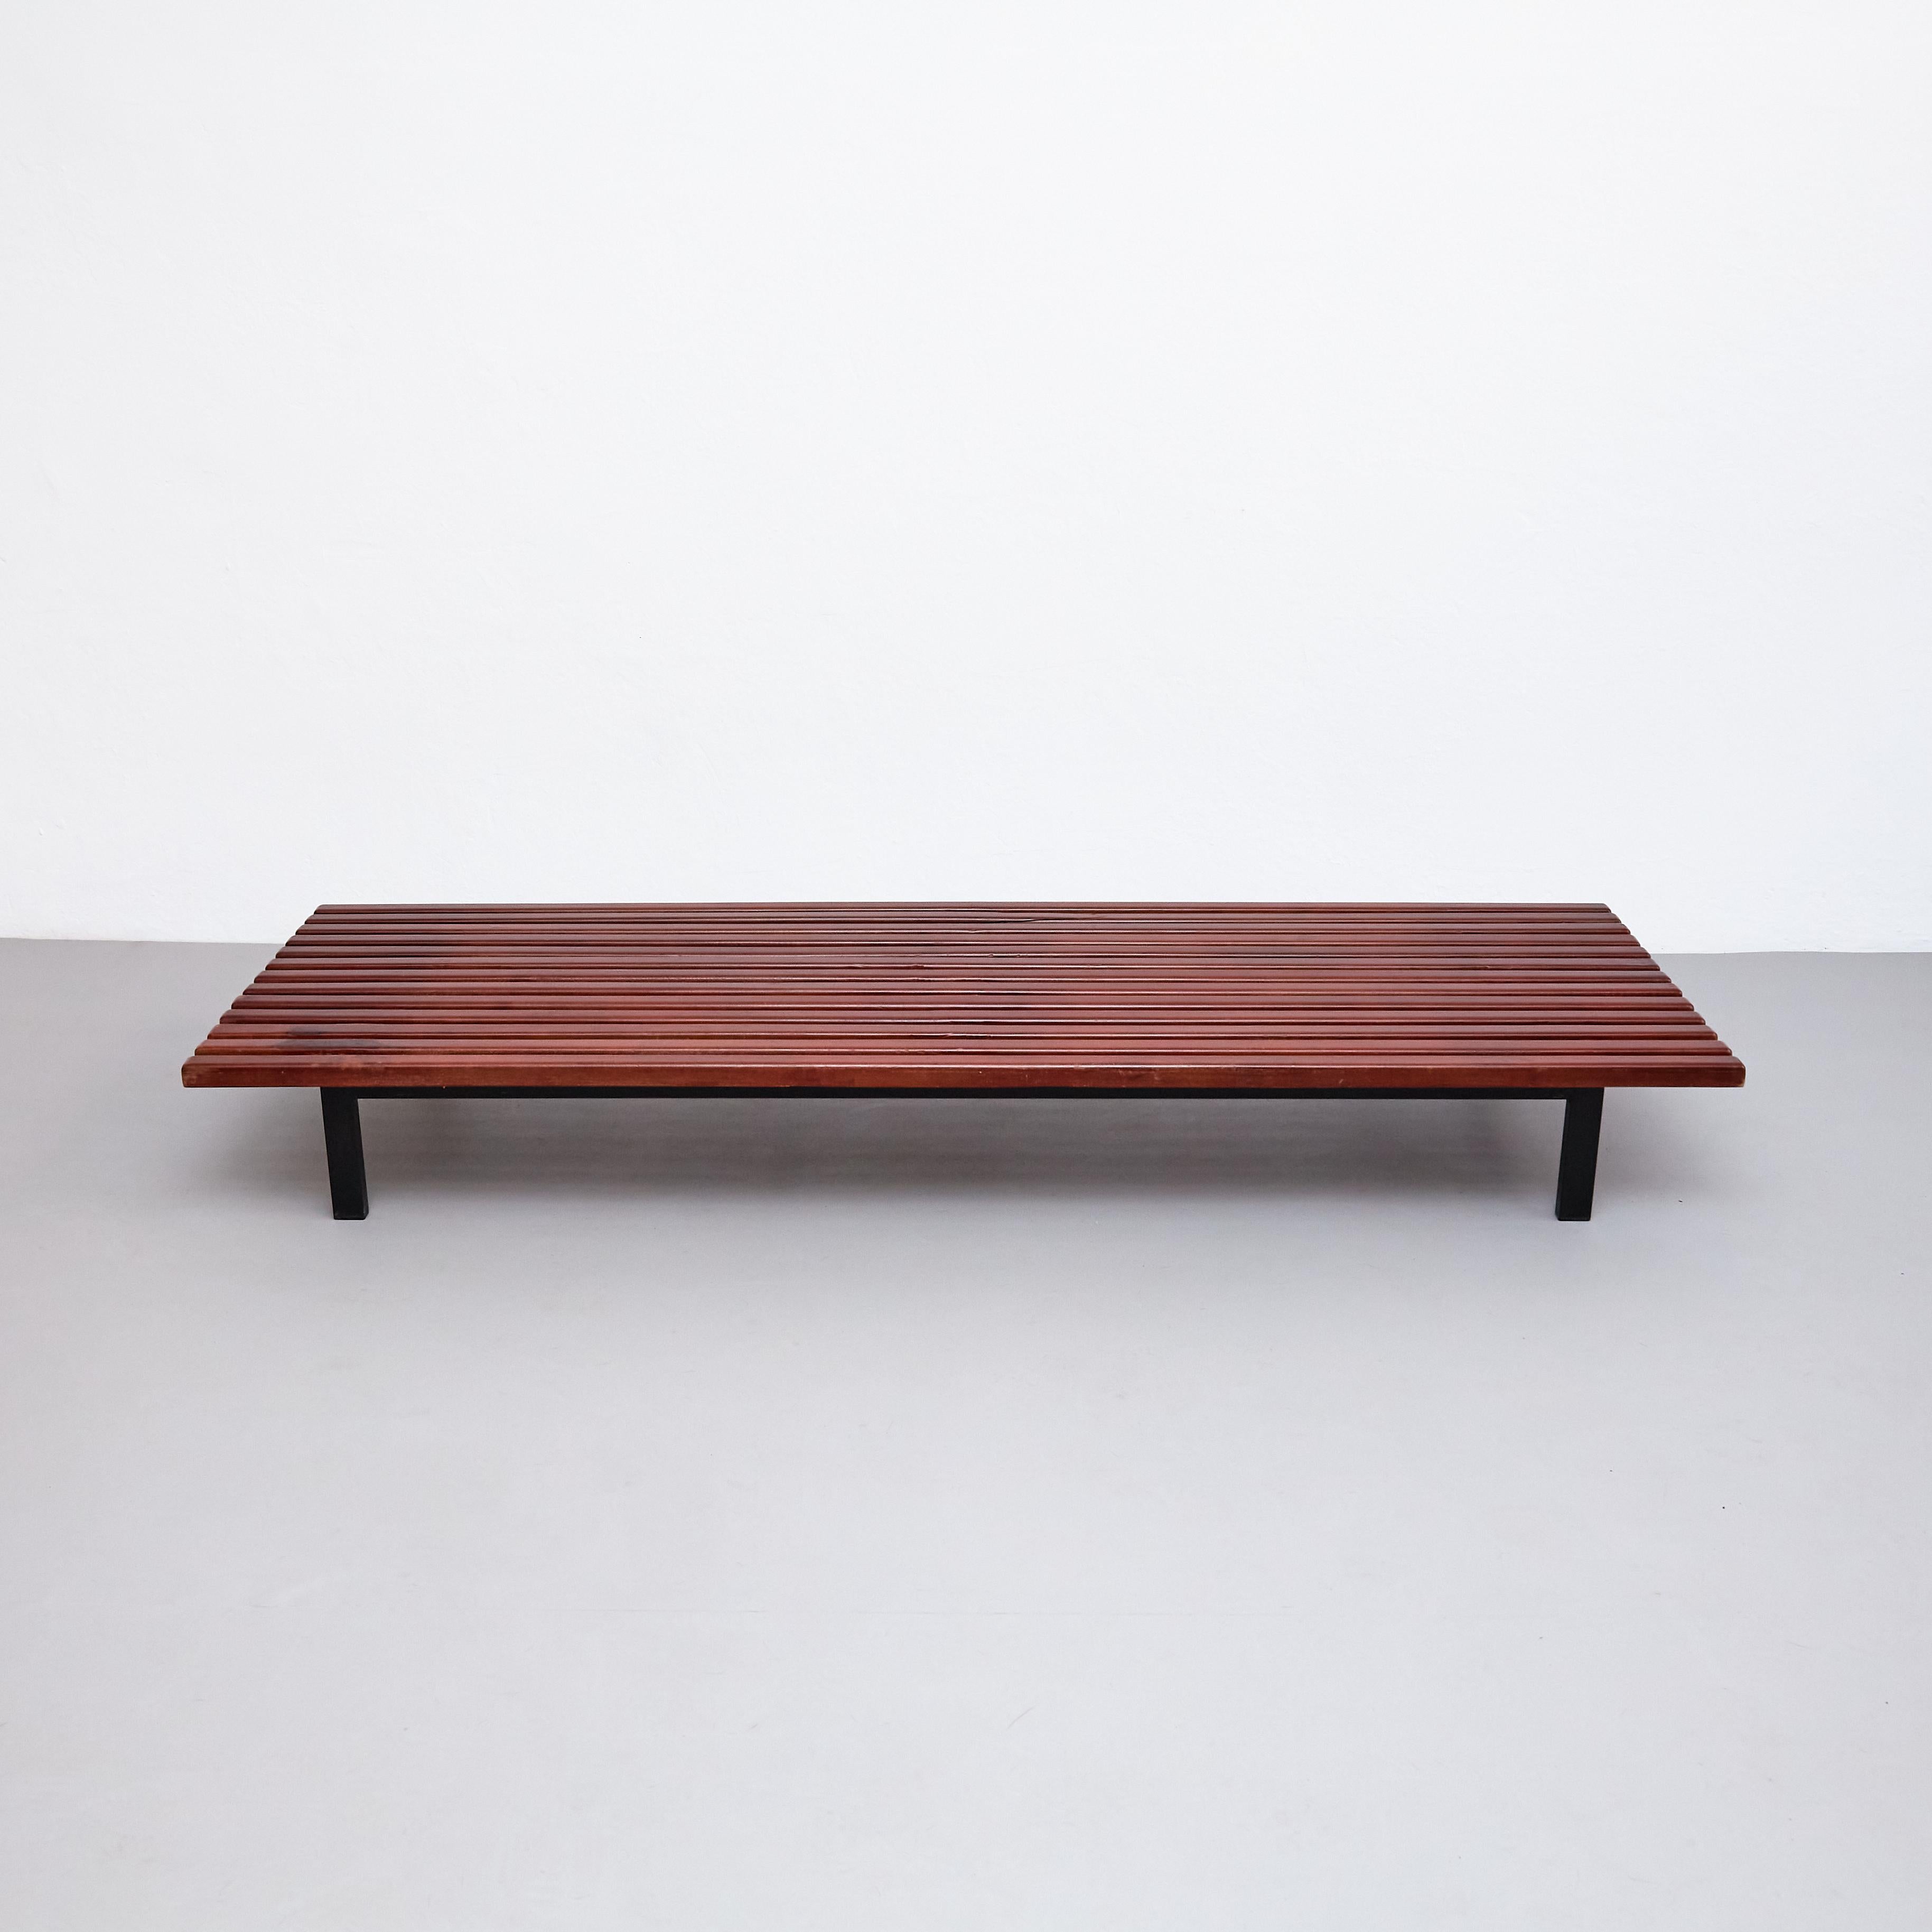 Charlotte Perriand Mid-Century Modern Wood Metal Cansado Bench, circa 1950 For Sale 1